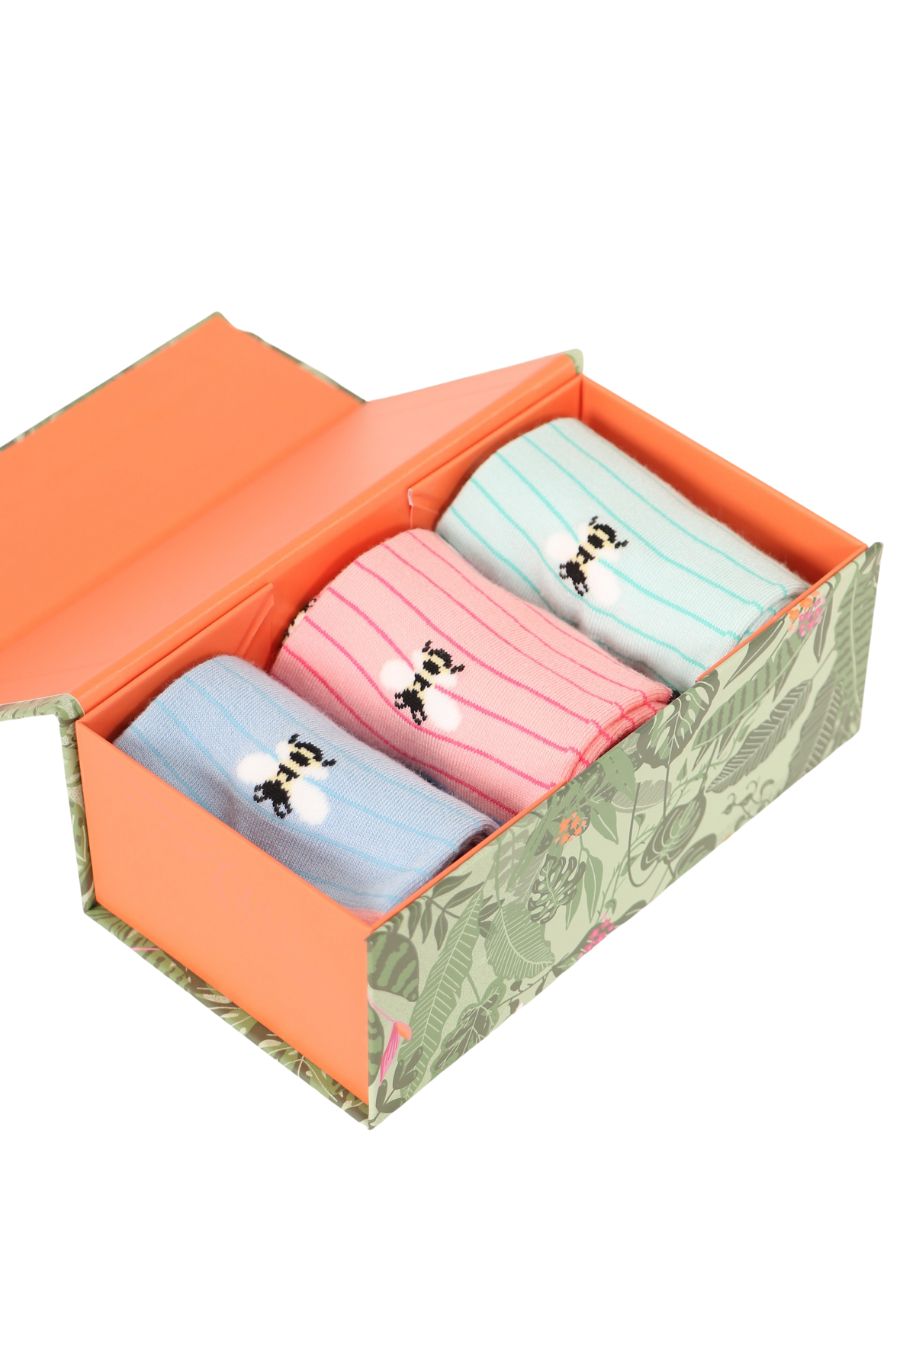 open gift box showing three pairs of women's bamboo ankle socks